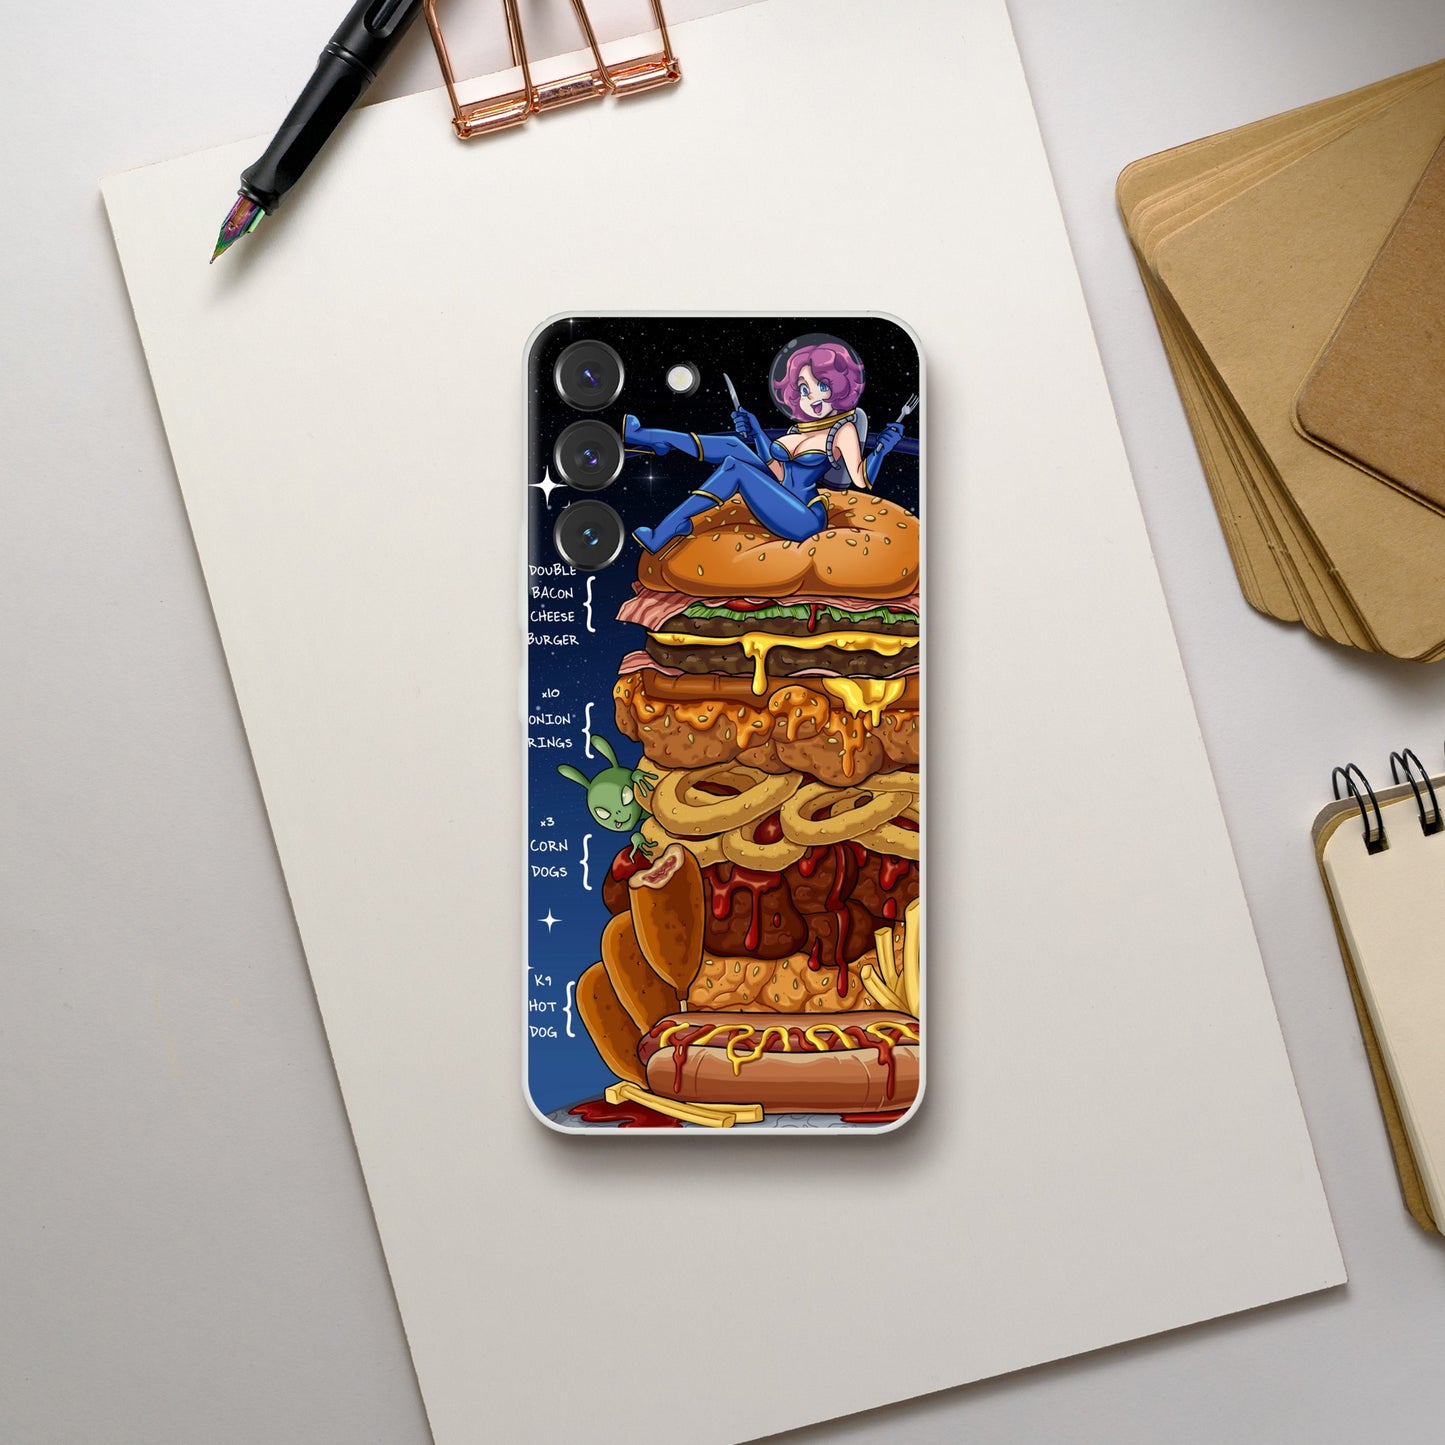 Cafe at the end of the universe 42 food challenge artwork Flexi phone case